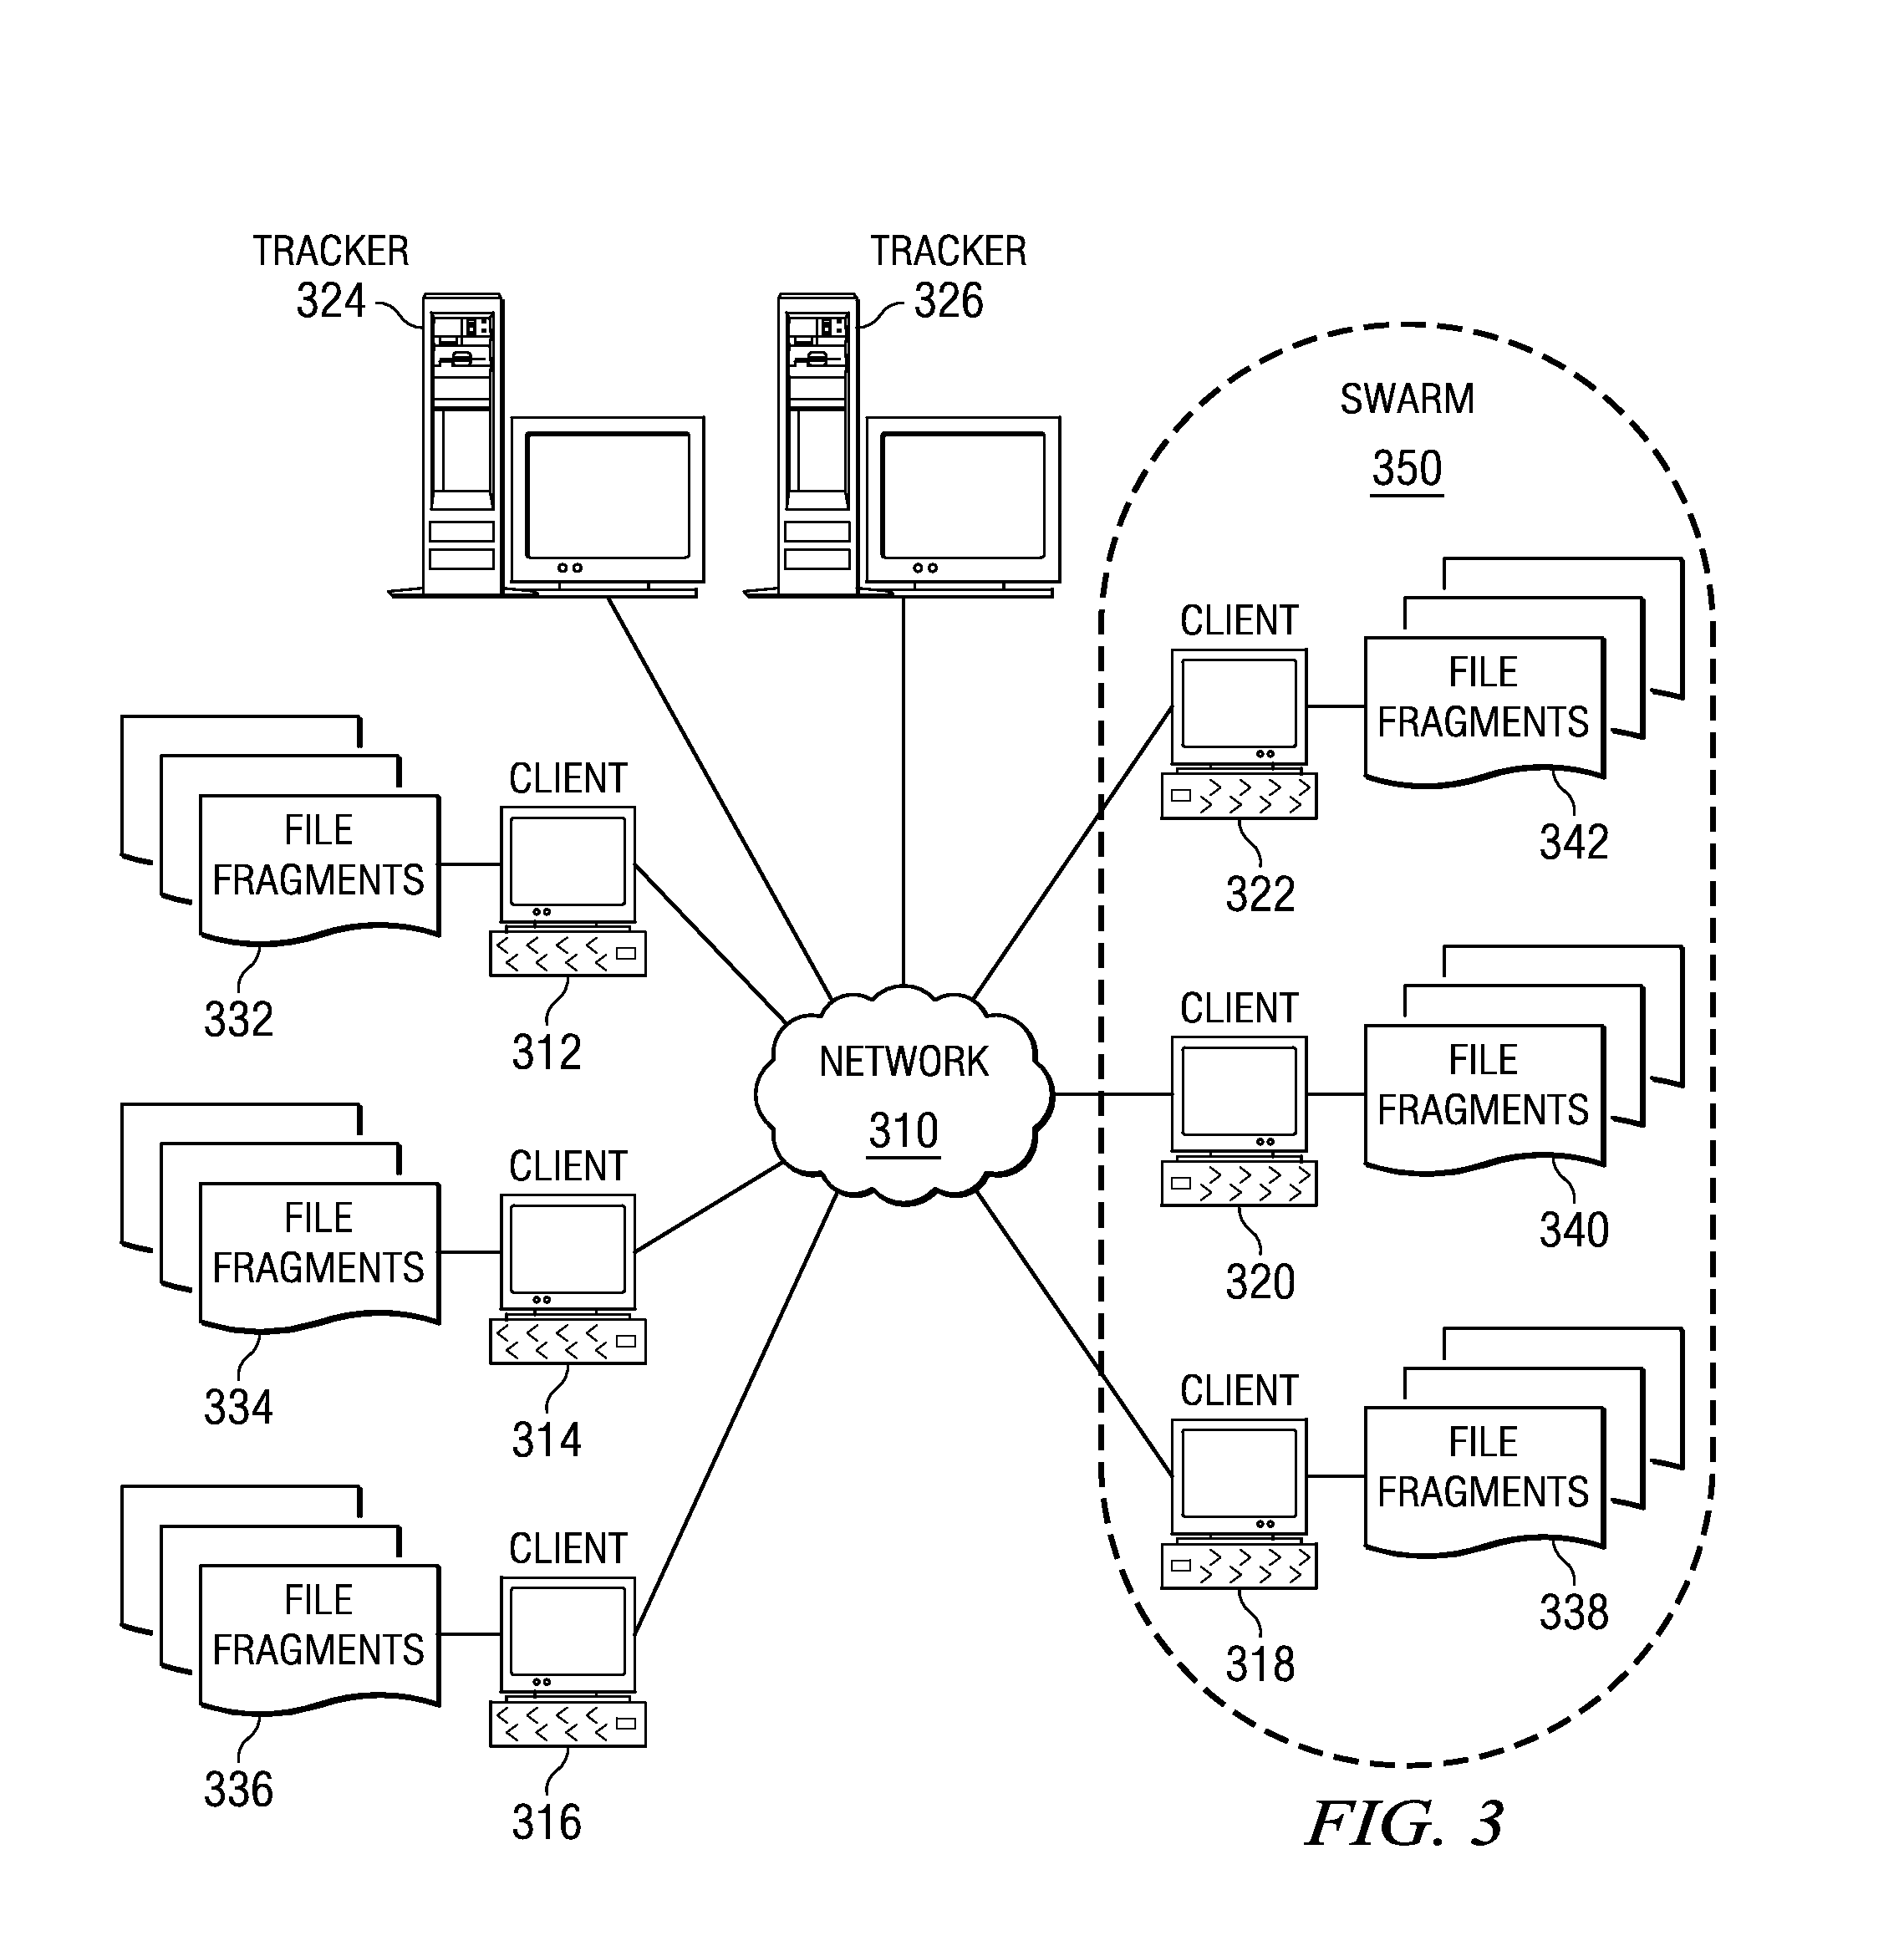 File Fragment Trading Based on Rarity Values in a Segmented File Sharing System